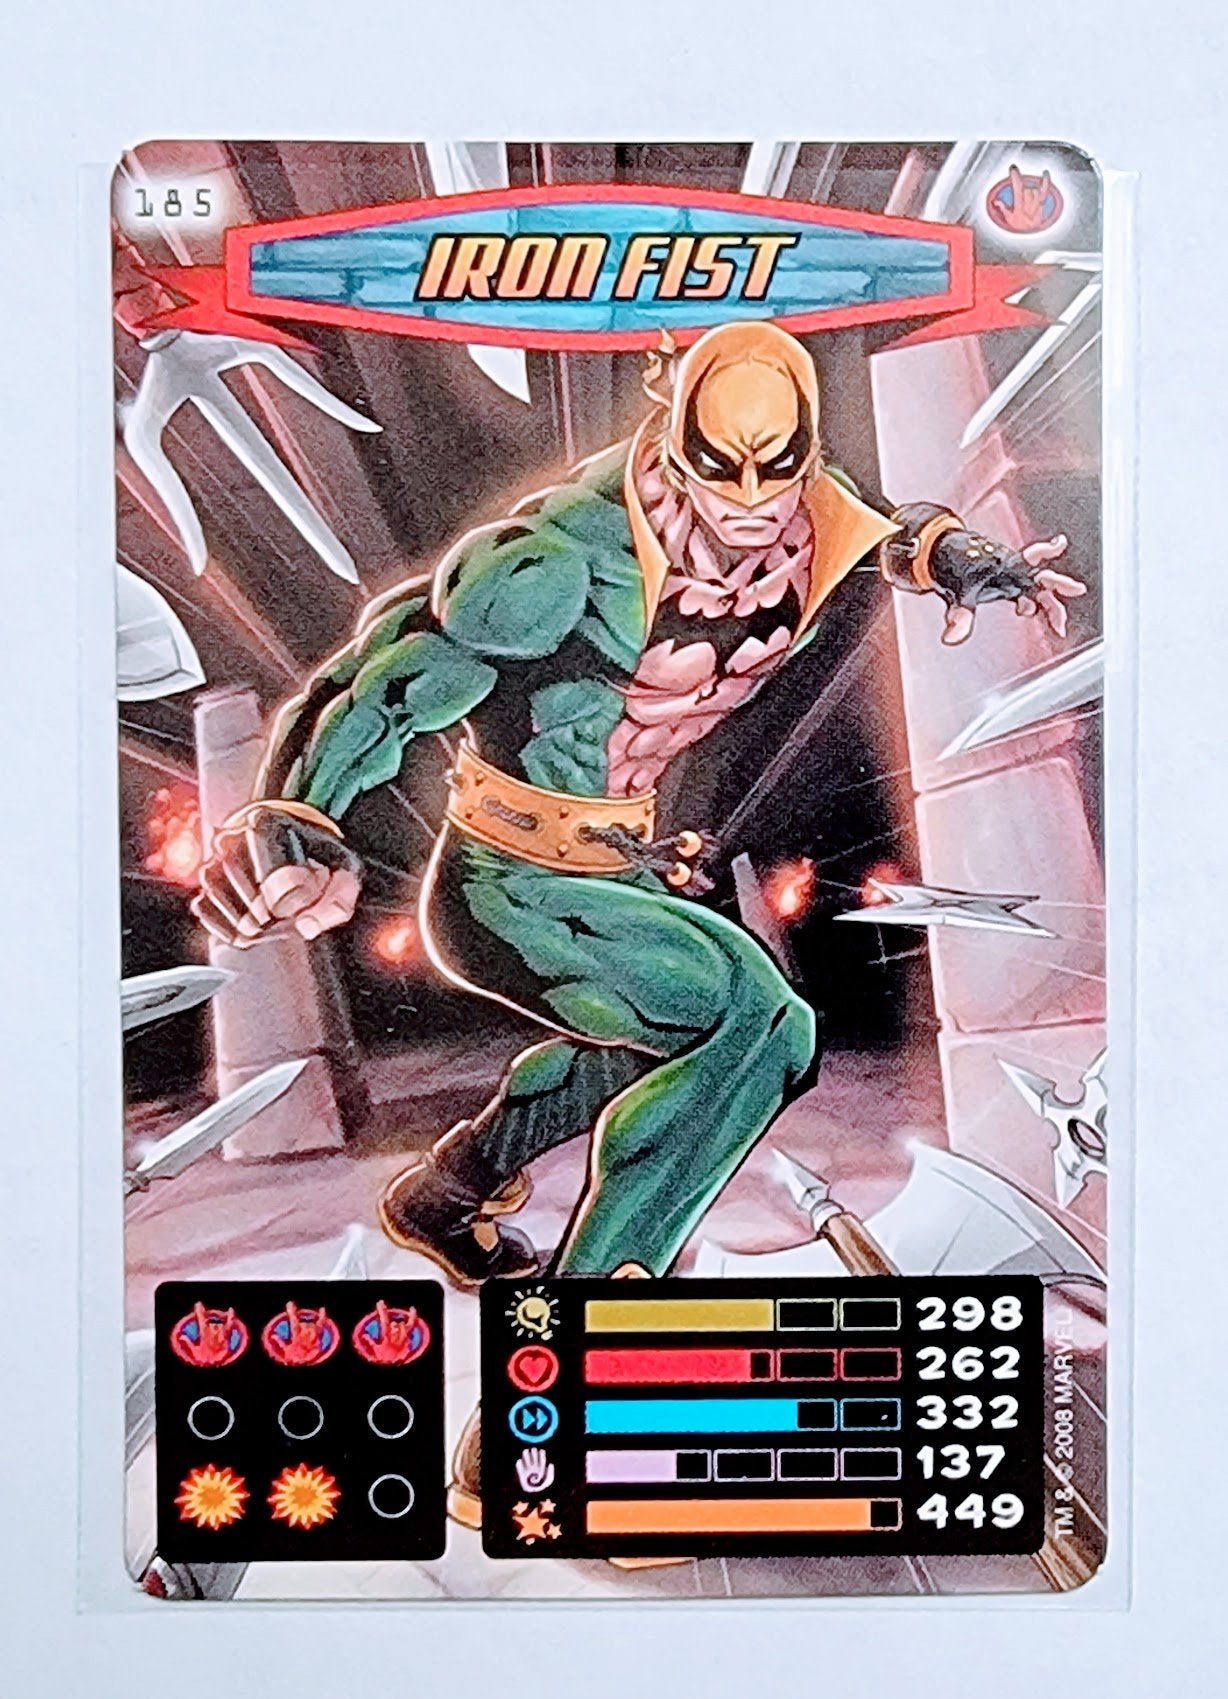 2008 Spiderman Heroes and Villains Iron Fist #185 Marvel Booster Trading Card UPTI simple Xclusive Collectibles   